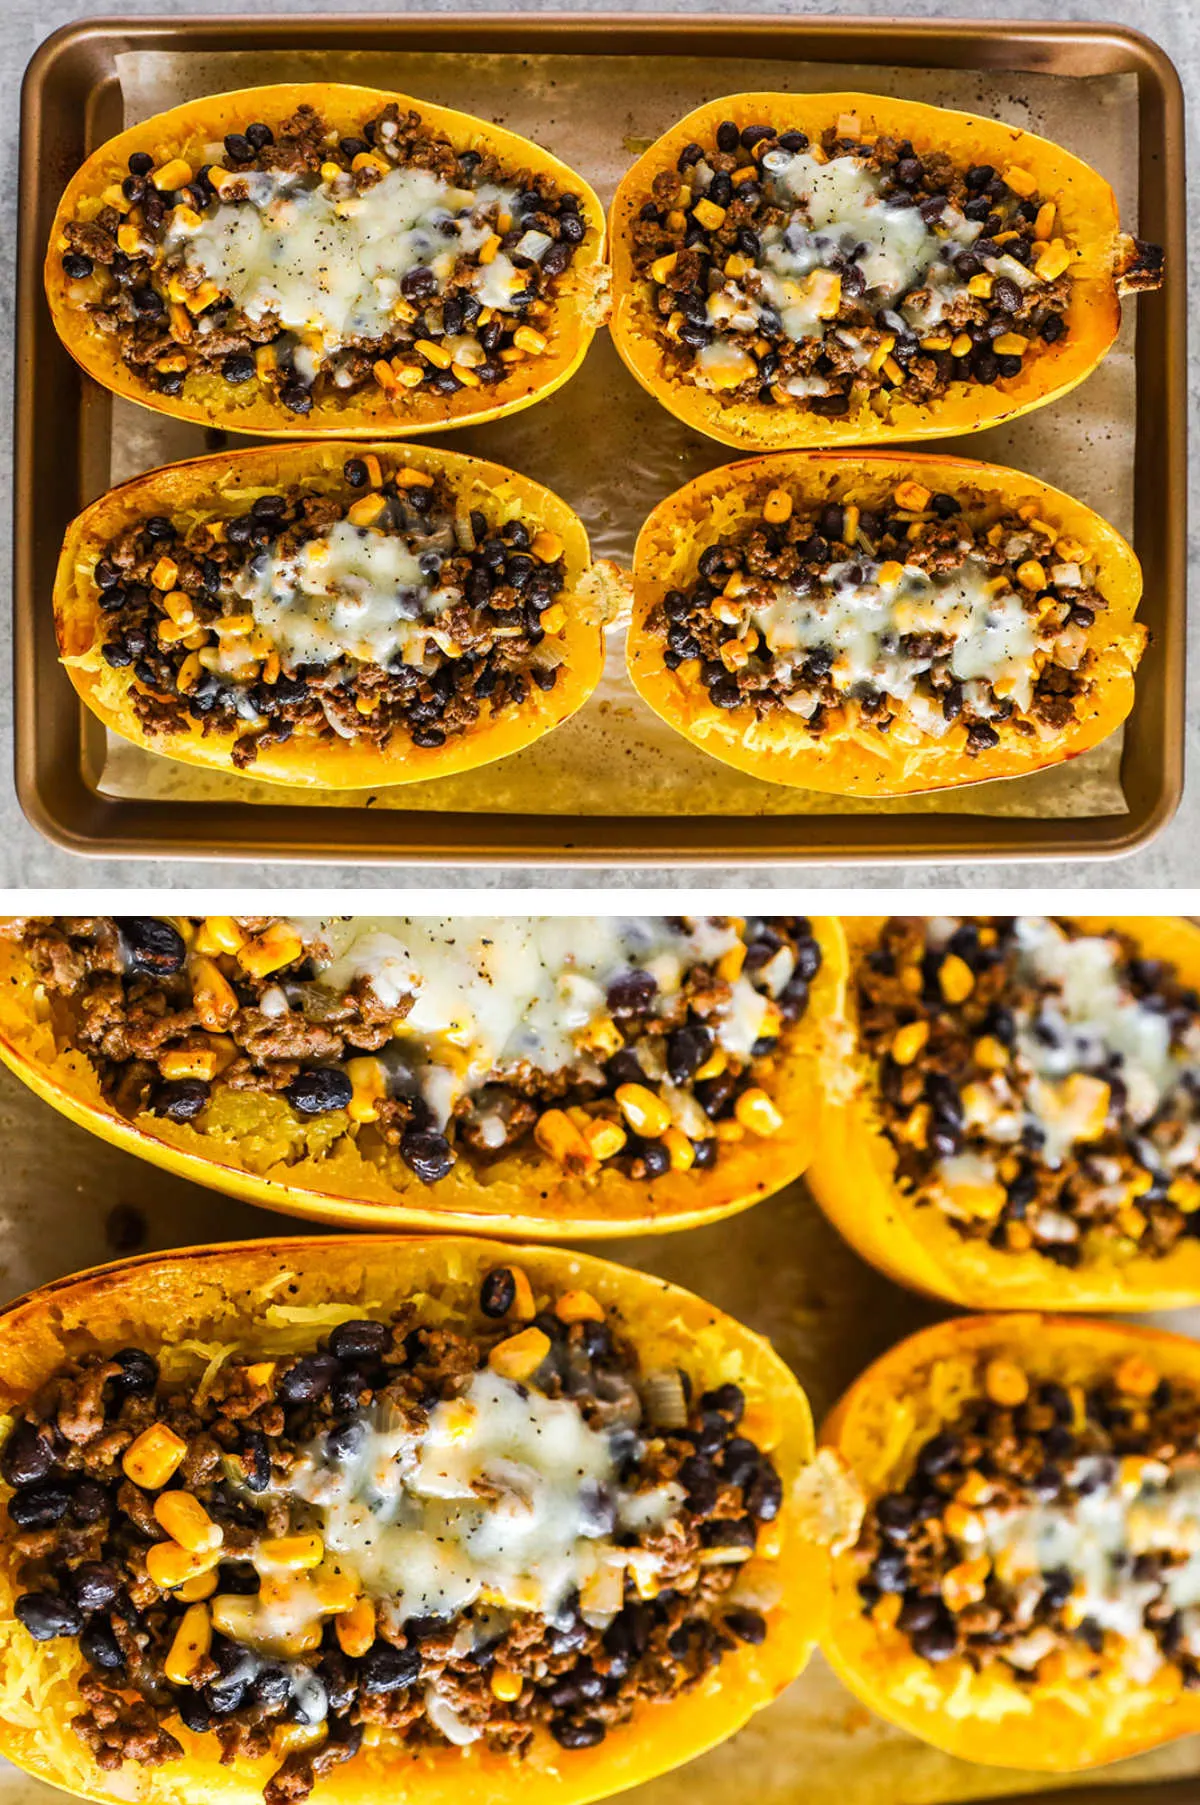 Two overhead images in one: 1. Four squash halves with white cheese baked into ingredients. 2. Closeup of finished squash halves with baked cheese and browned corn, beef and black beans. 